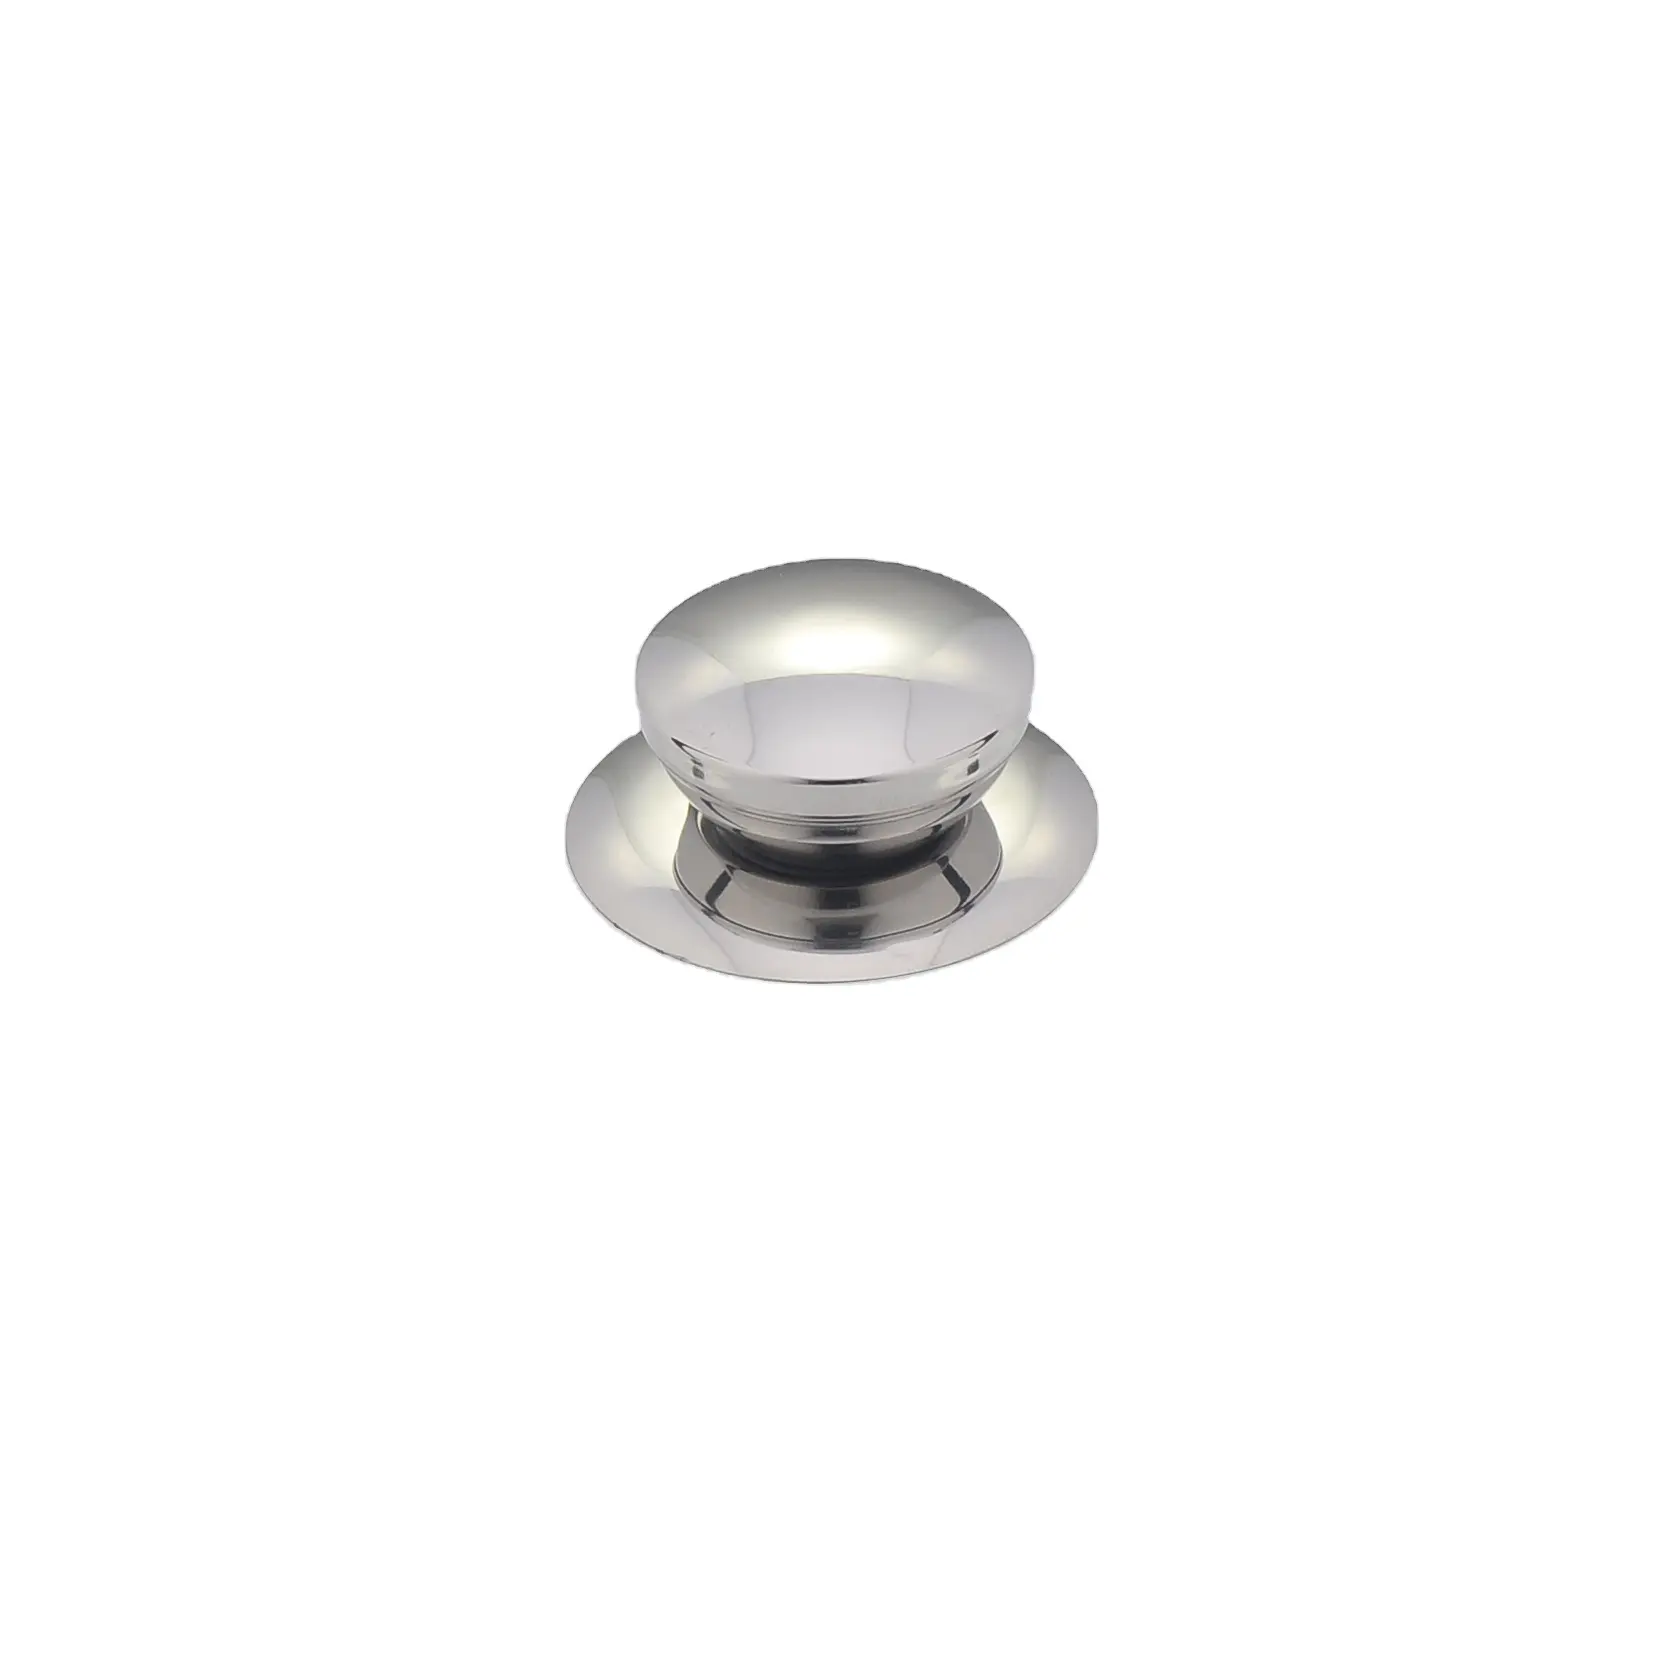 Shixing hot sales Stainless steel Pot Handle knob for cookware lids